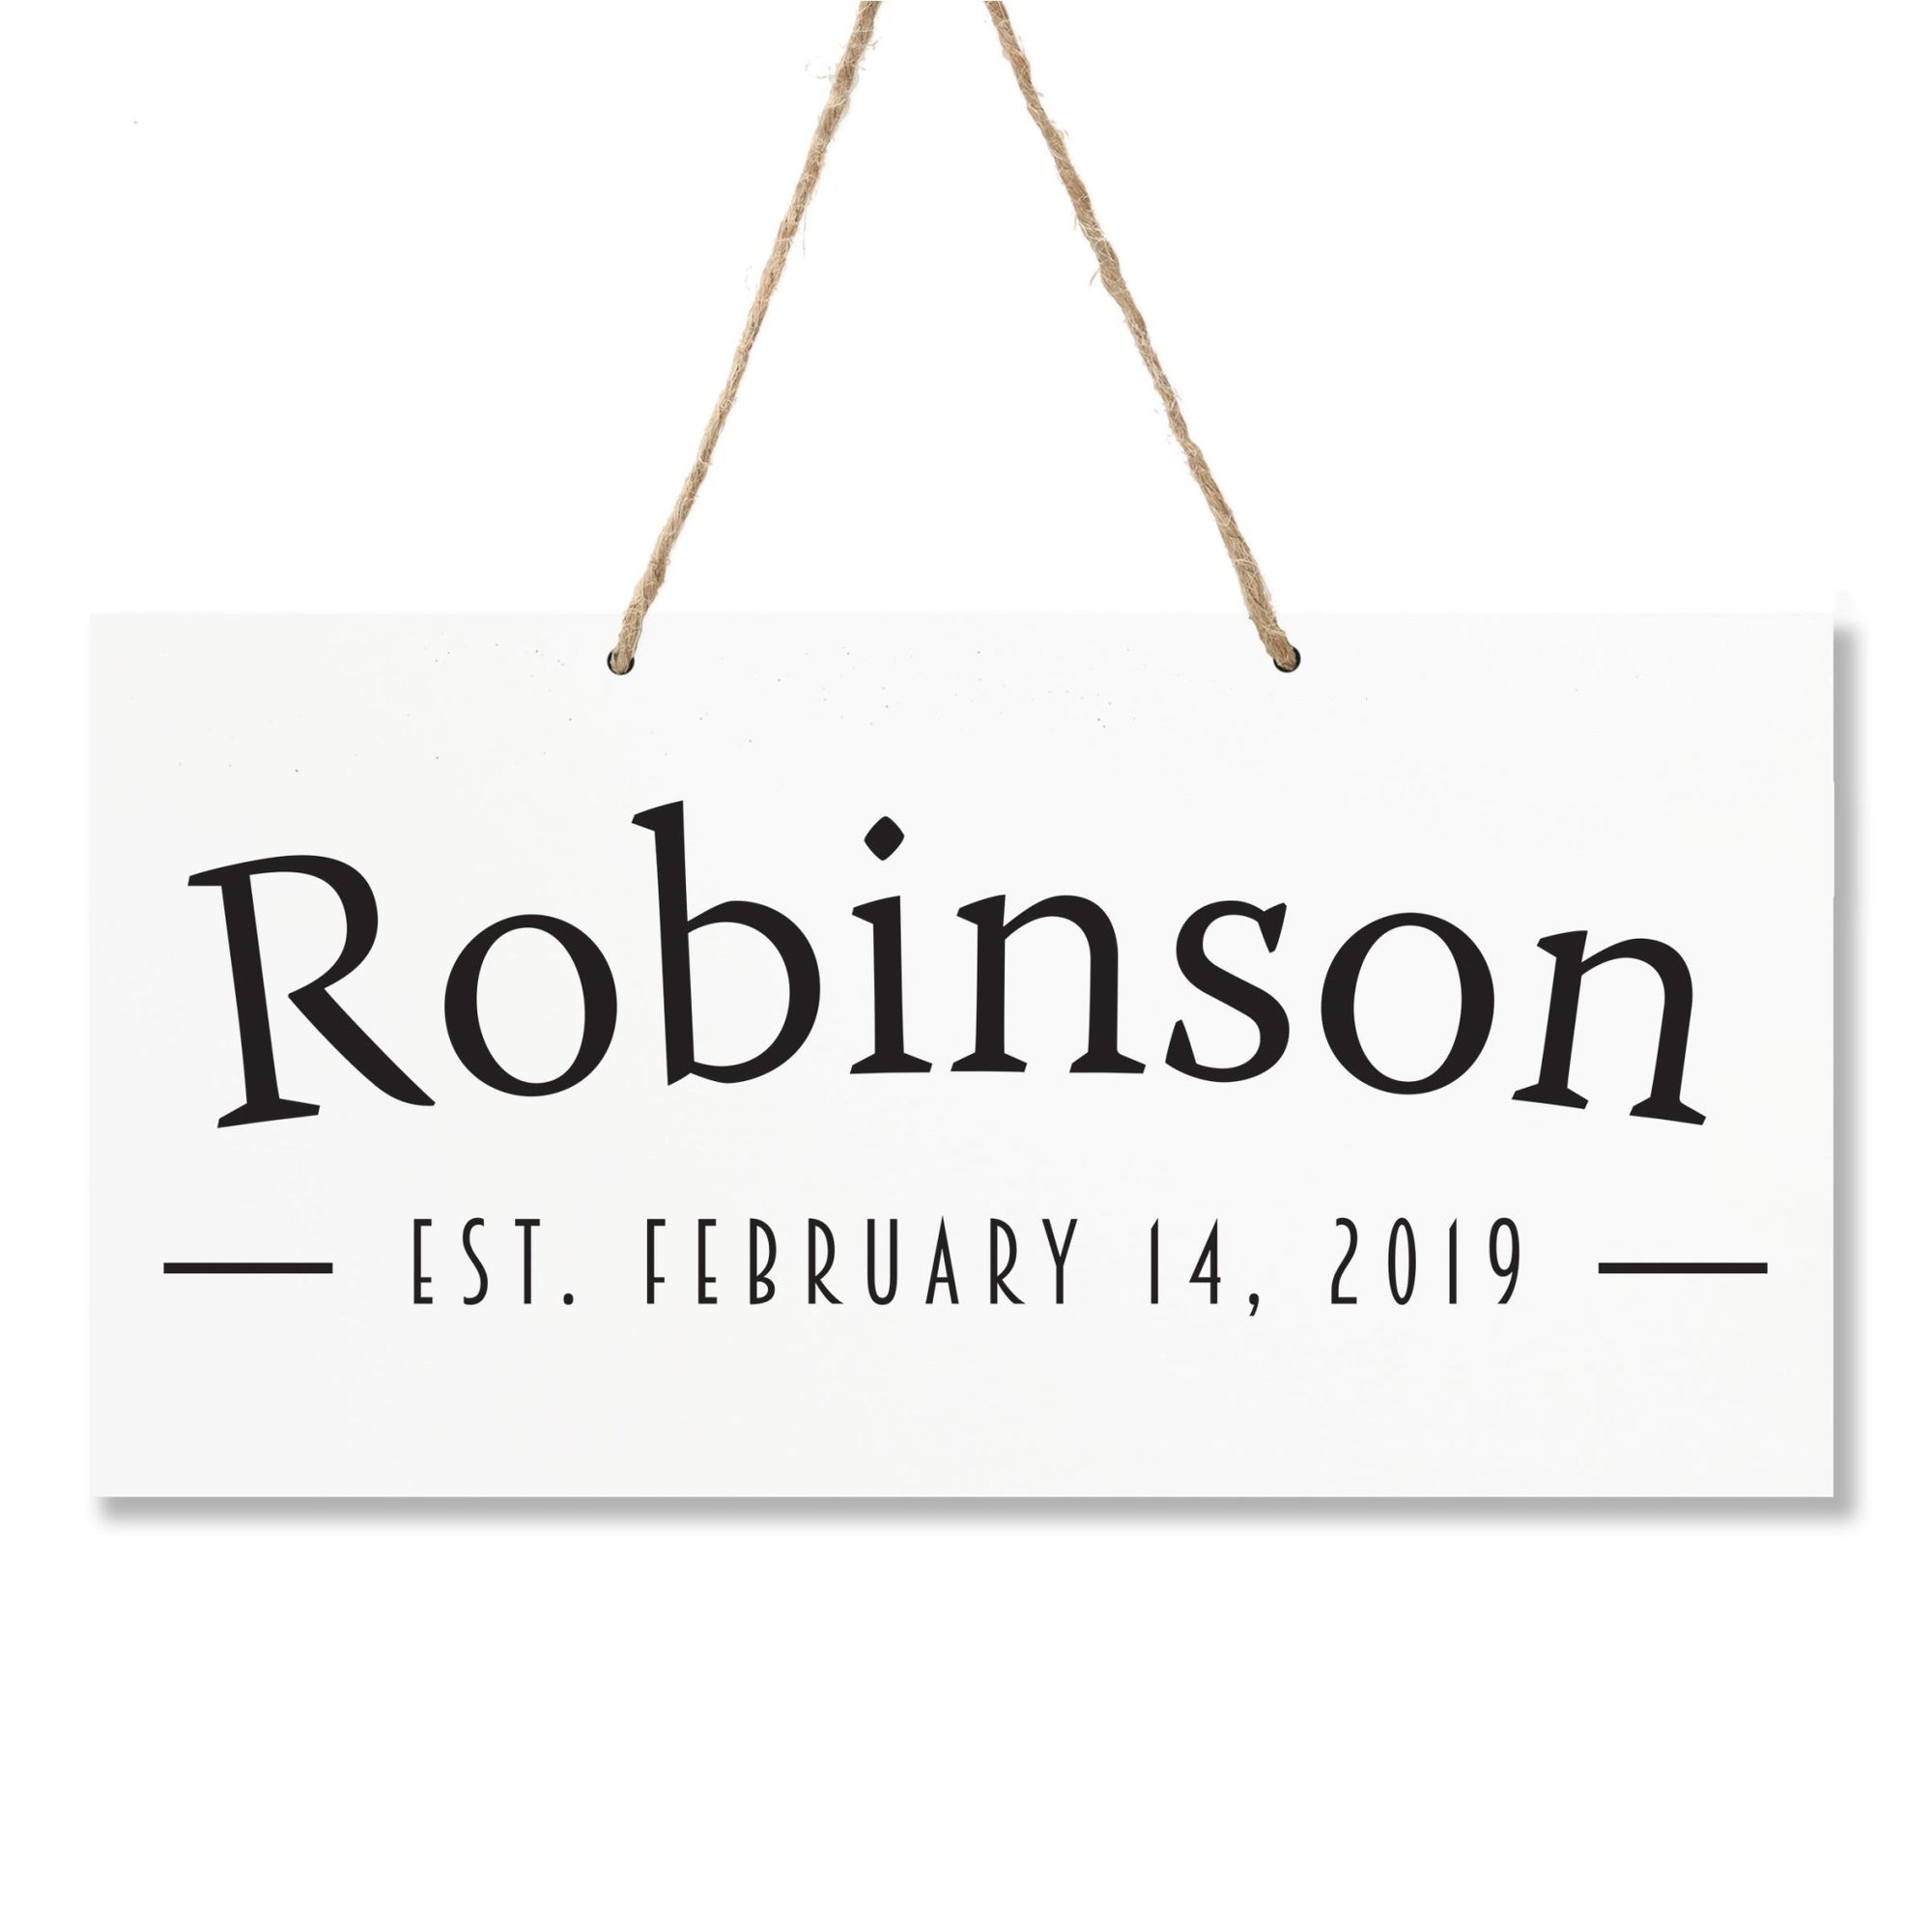 Personalized Family Name Sign For New Home - Established - LifeSong Milestones